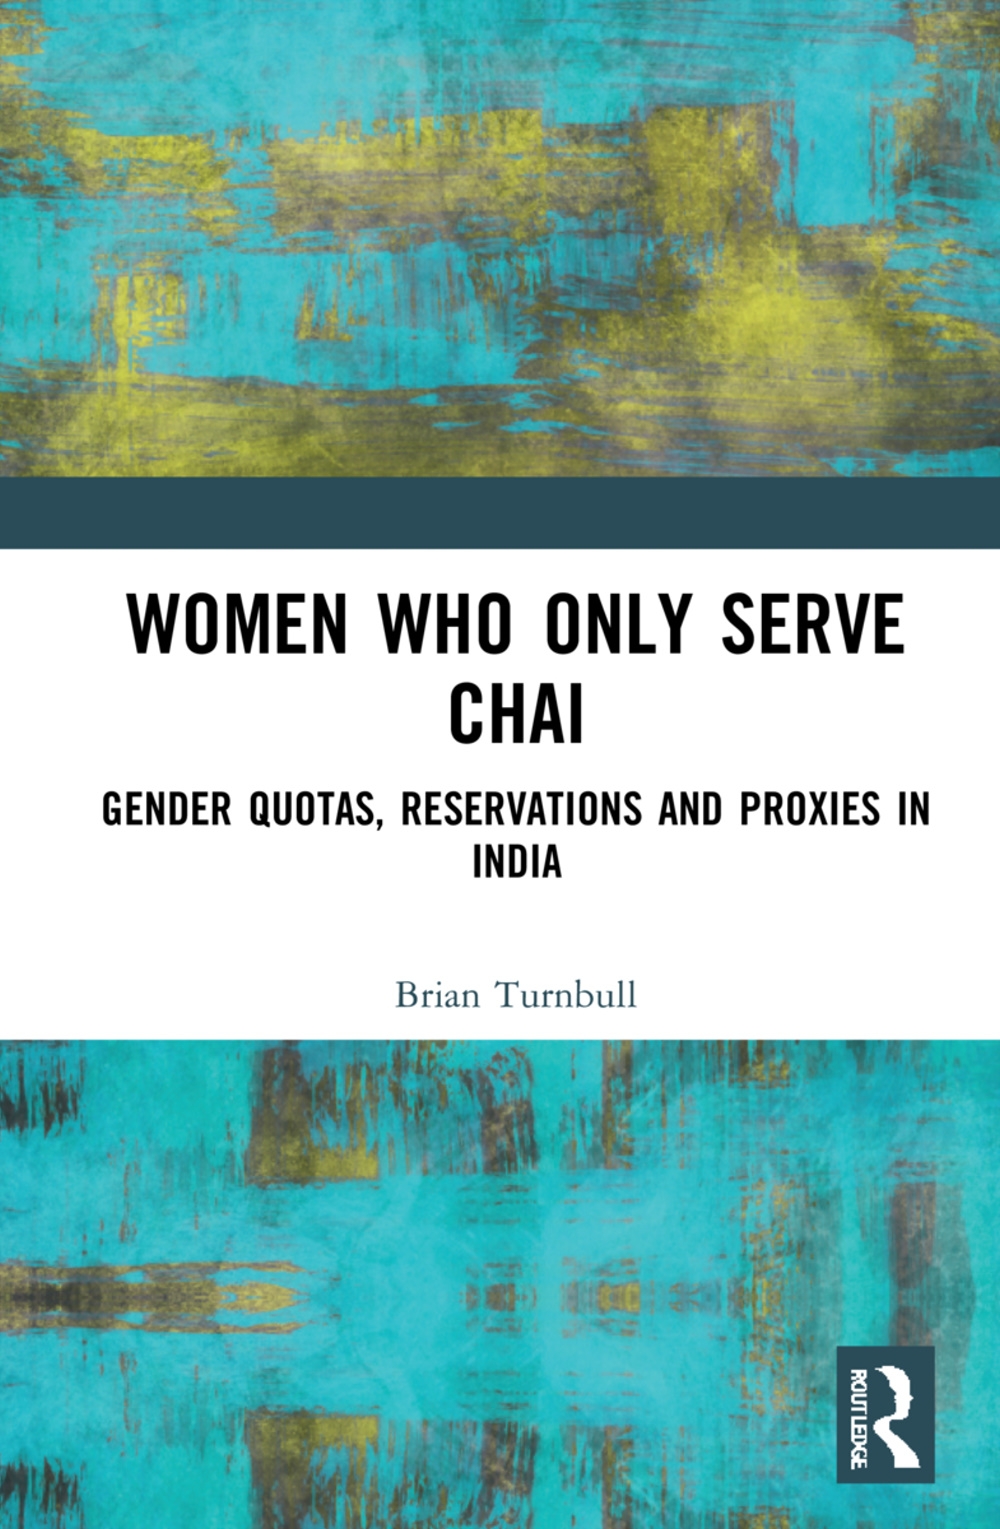 Women Who Only Serve Chai: Gender Quotas, Reservations and Proxies in India